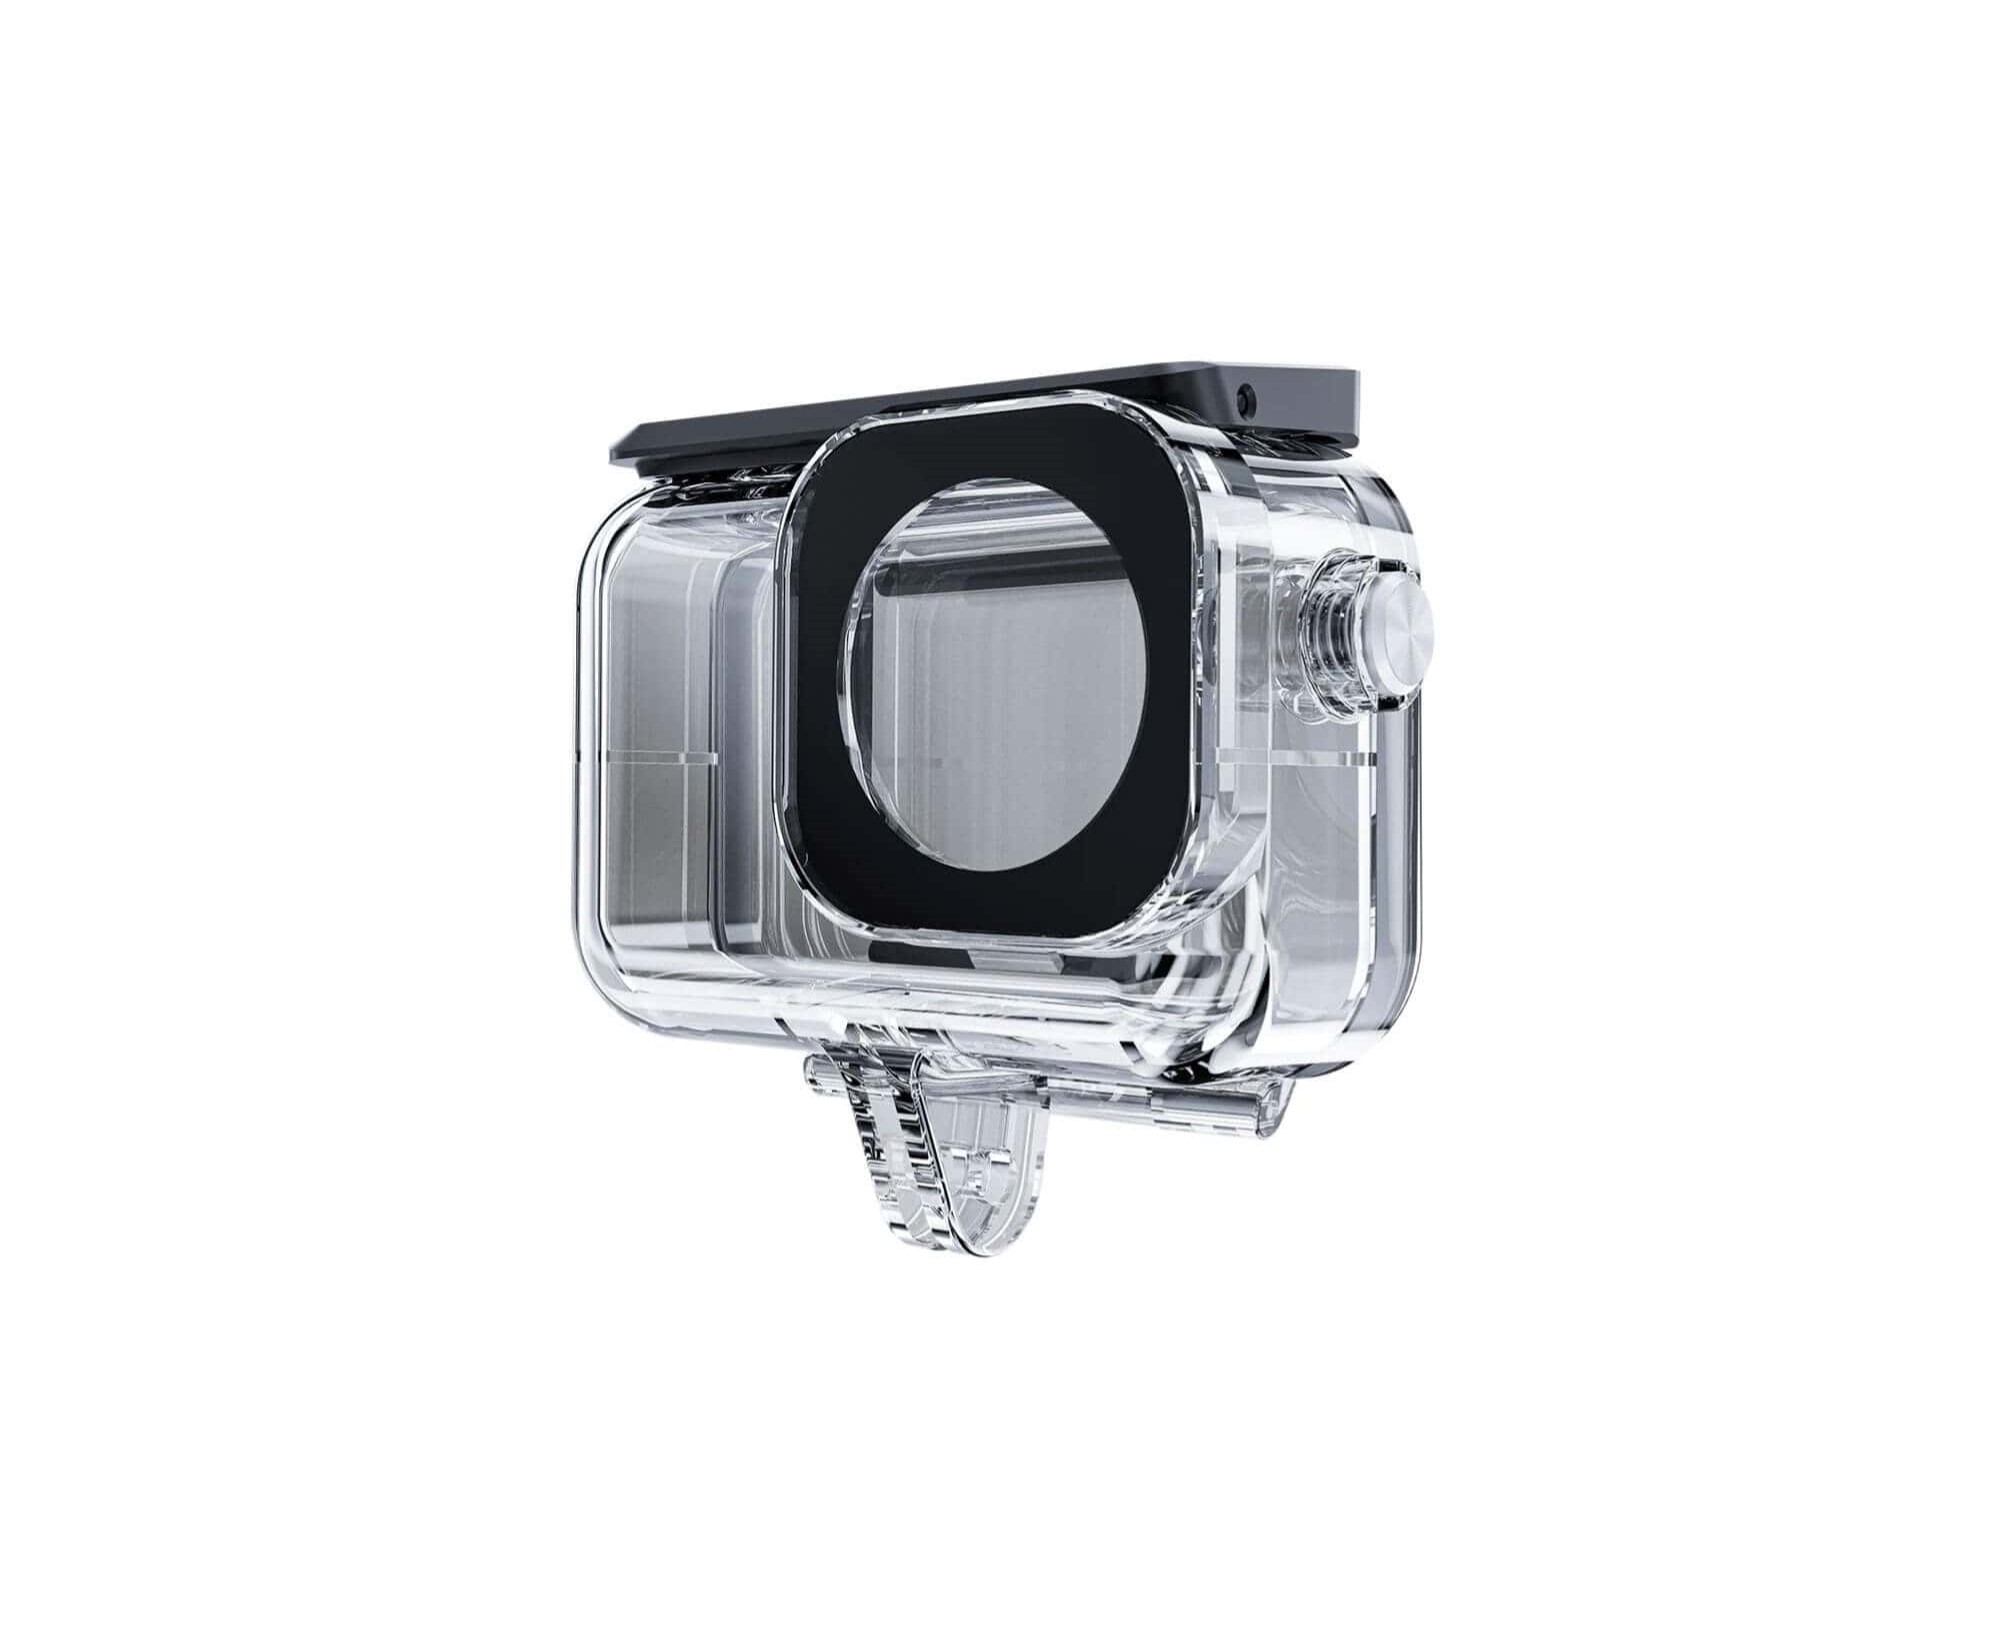 how-to-remove-the-waterproof-case-of-action-camera